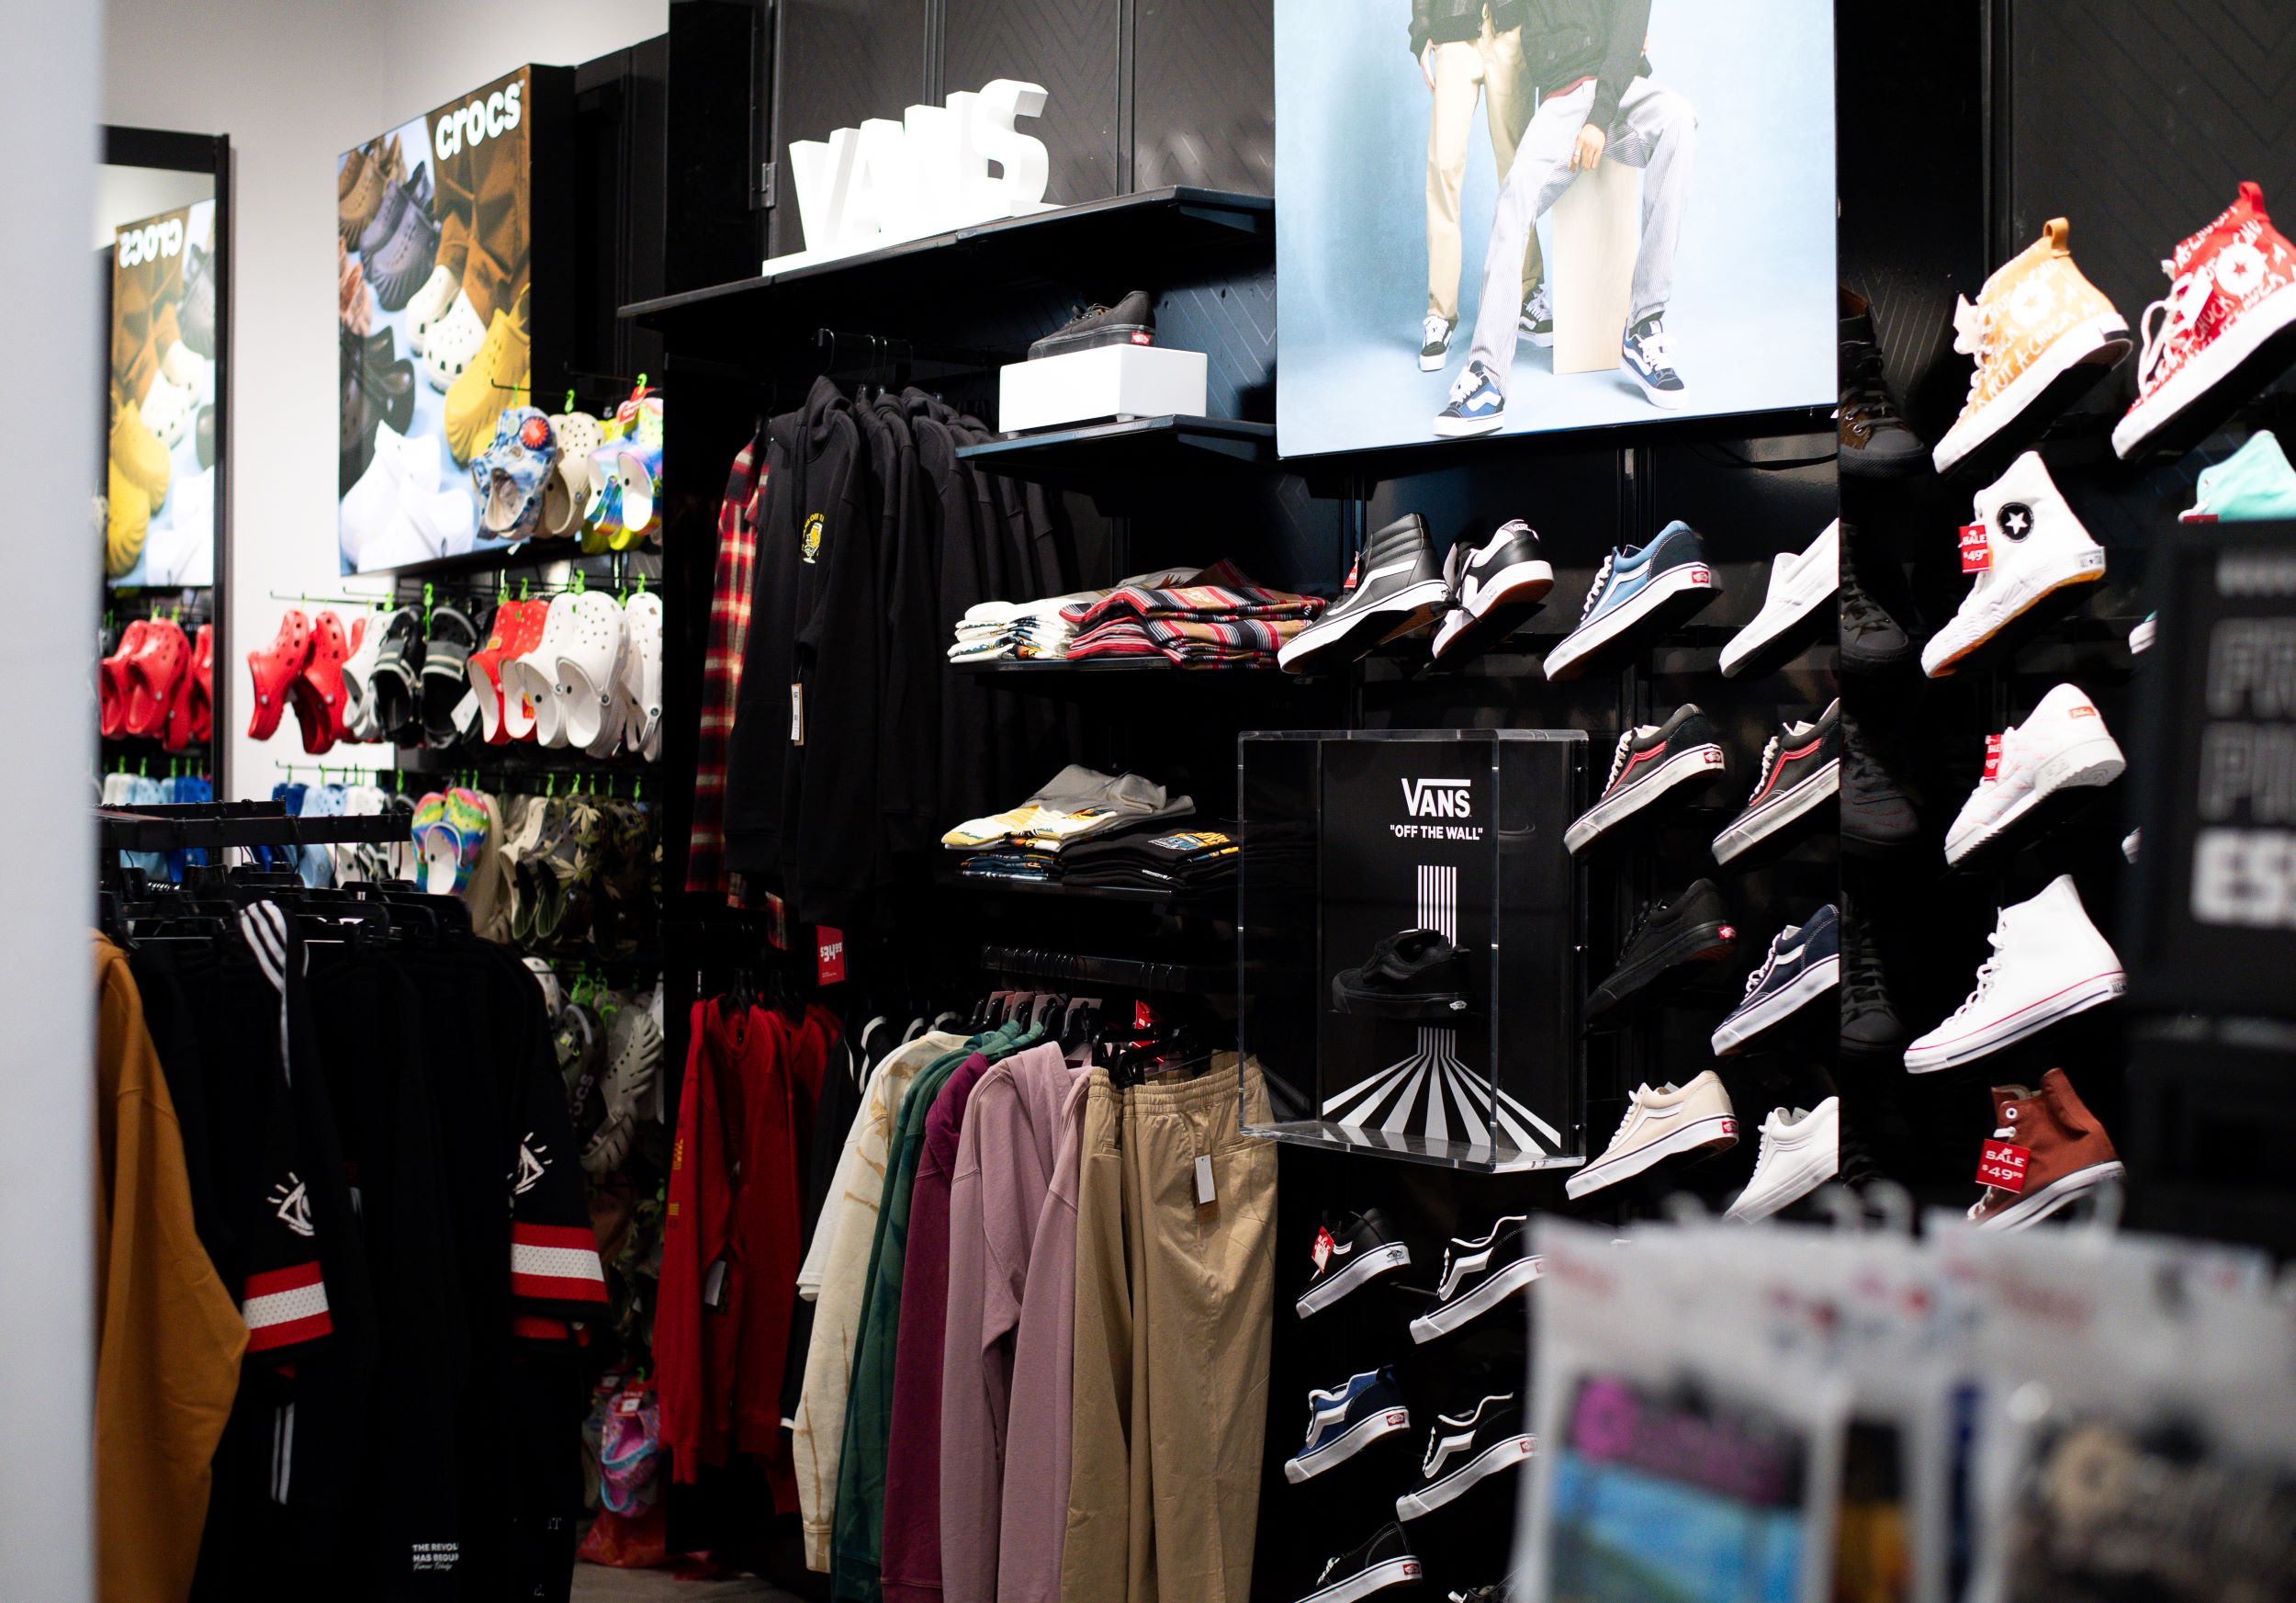 Interior of a trendy clothing store featuring racks and shelves filled with various brands of streetwear, including shoes, t-shirts, and accessories.